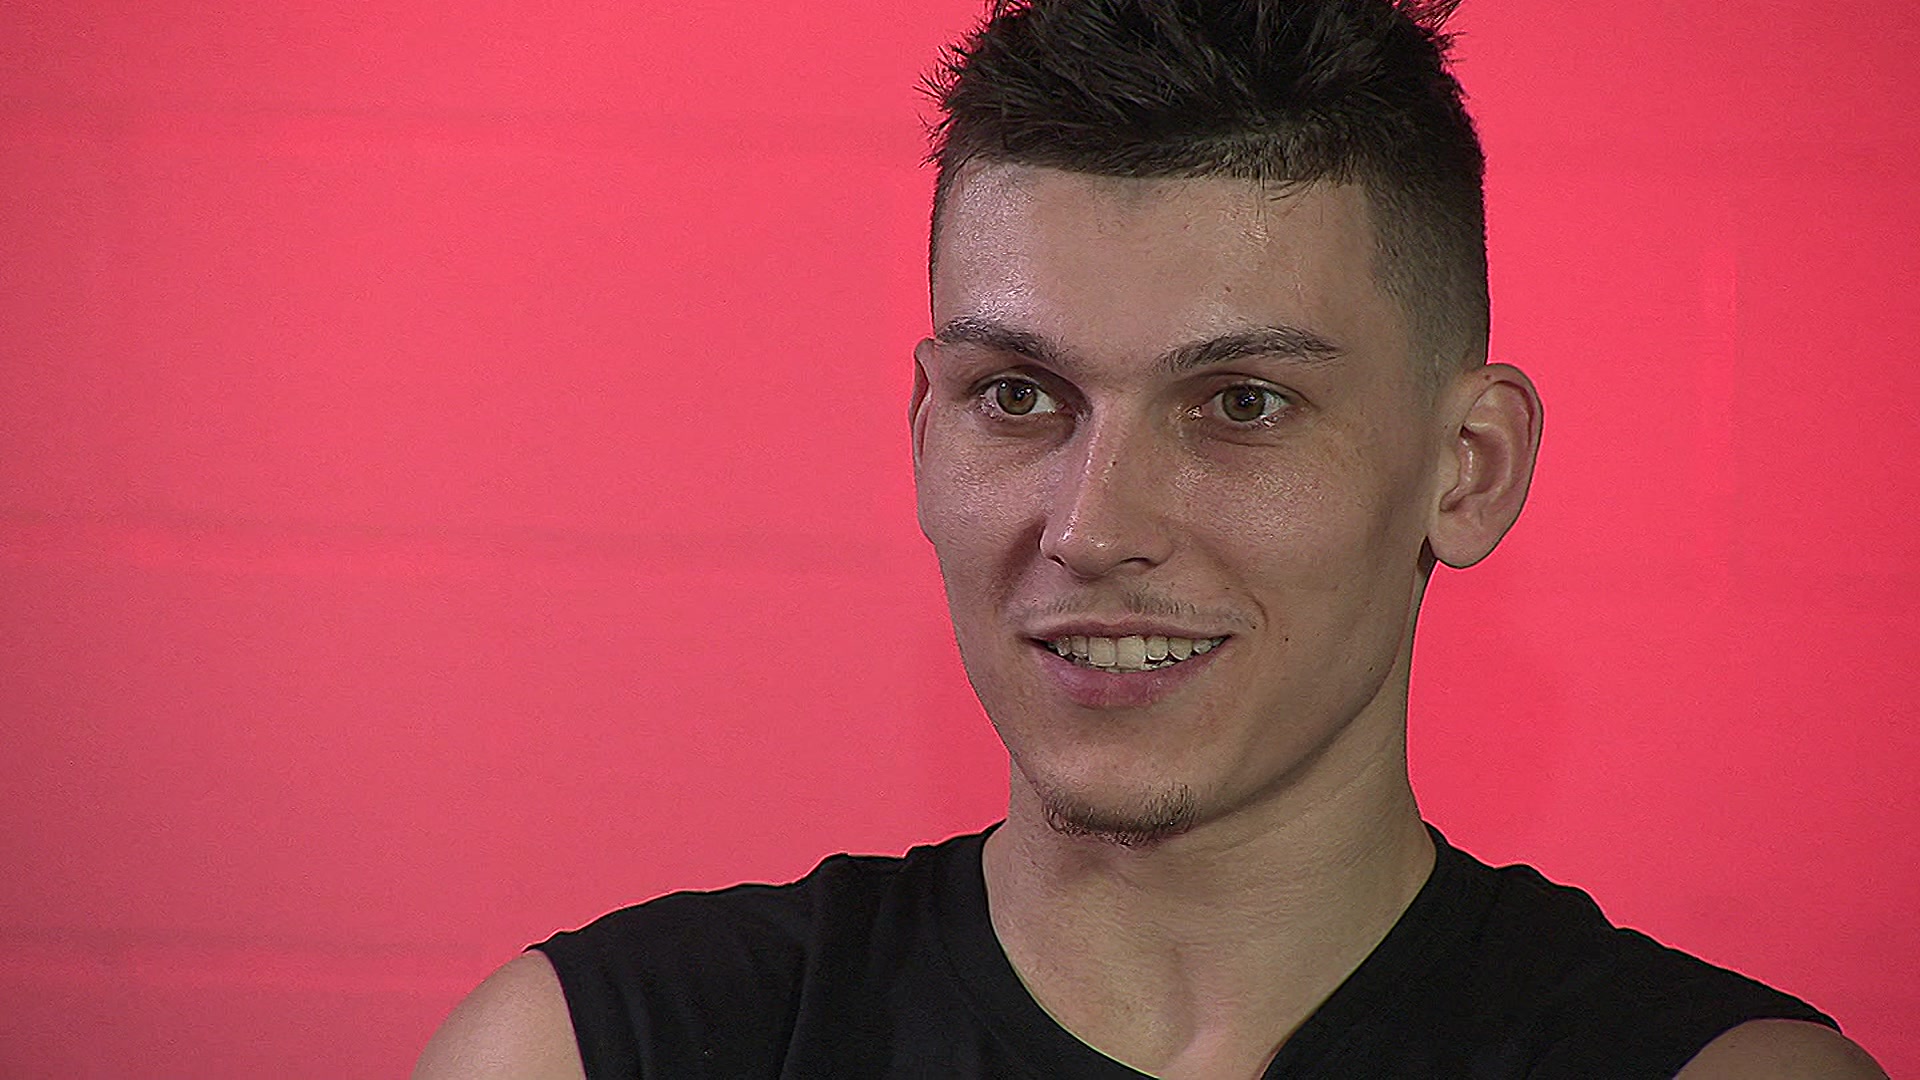 At Just 22, Miami Heat Superstar Tyler Herro Continues To Torch The Competition